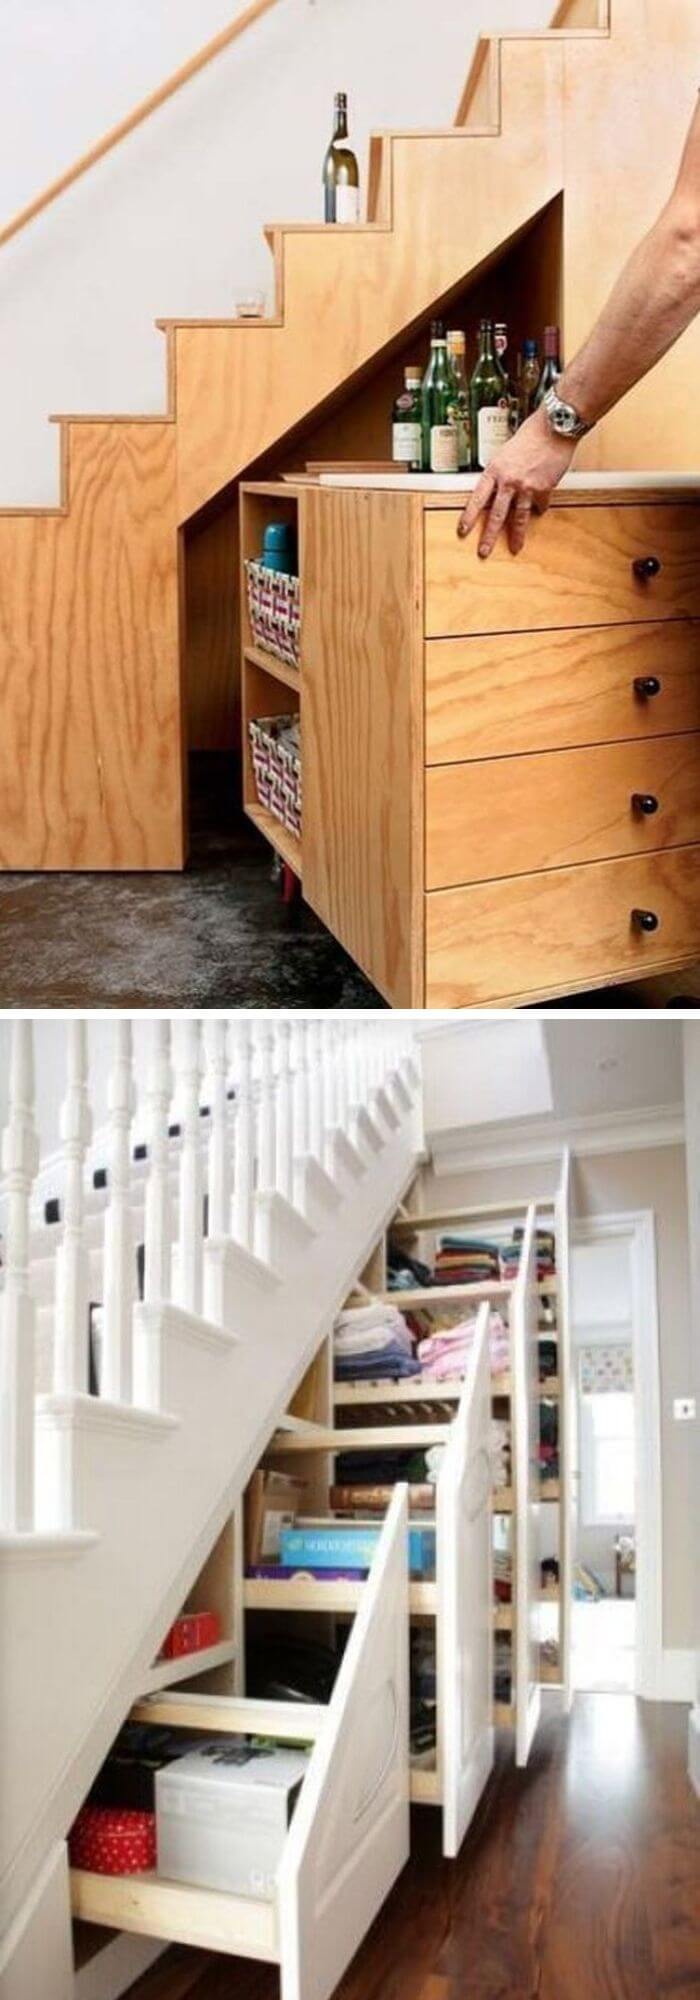 19 storage ideas for small spaces